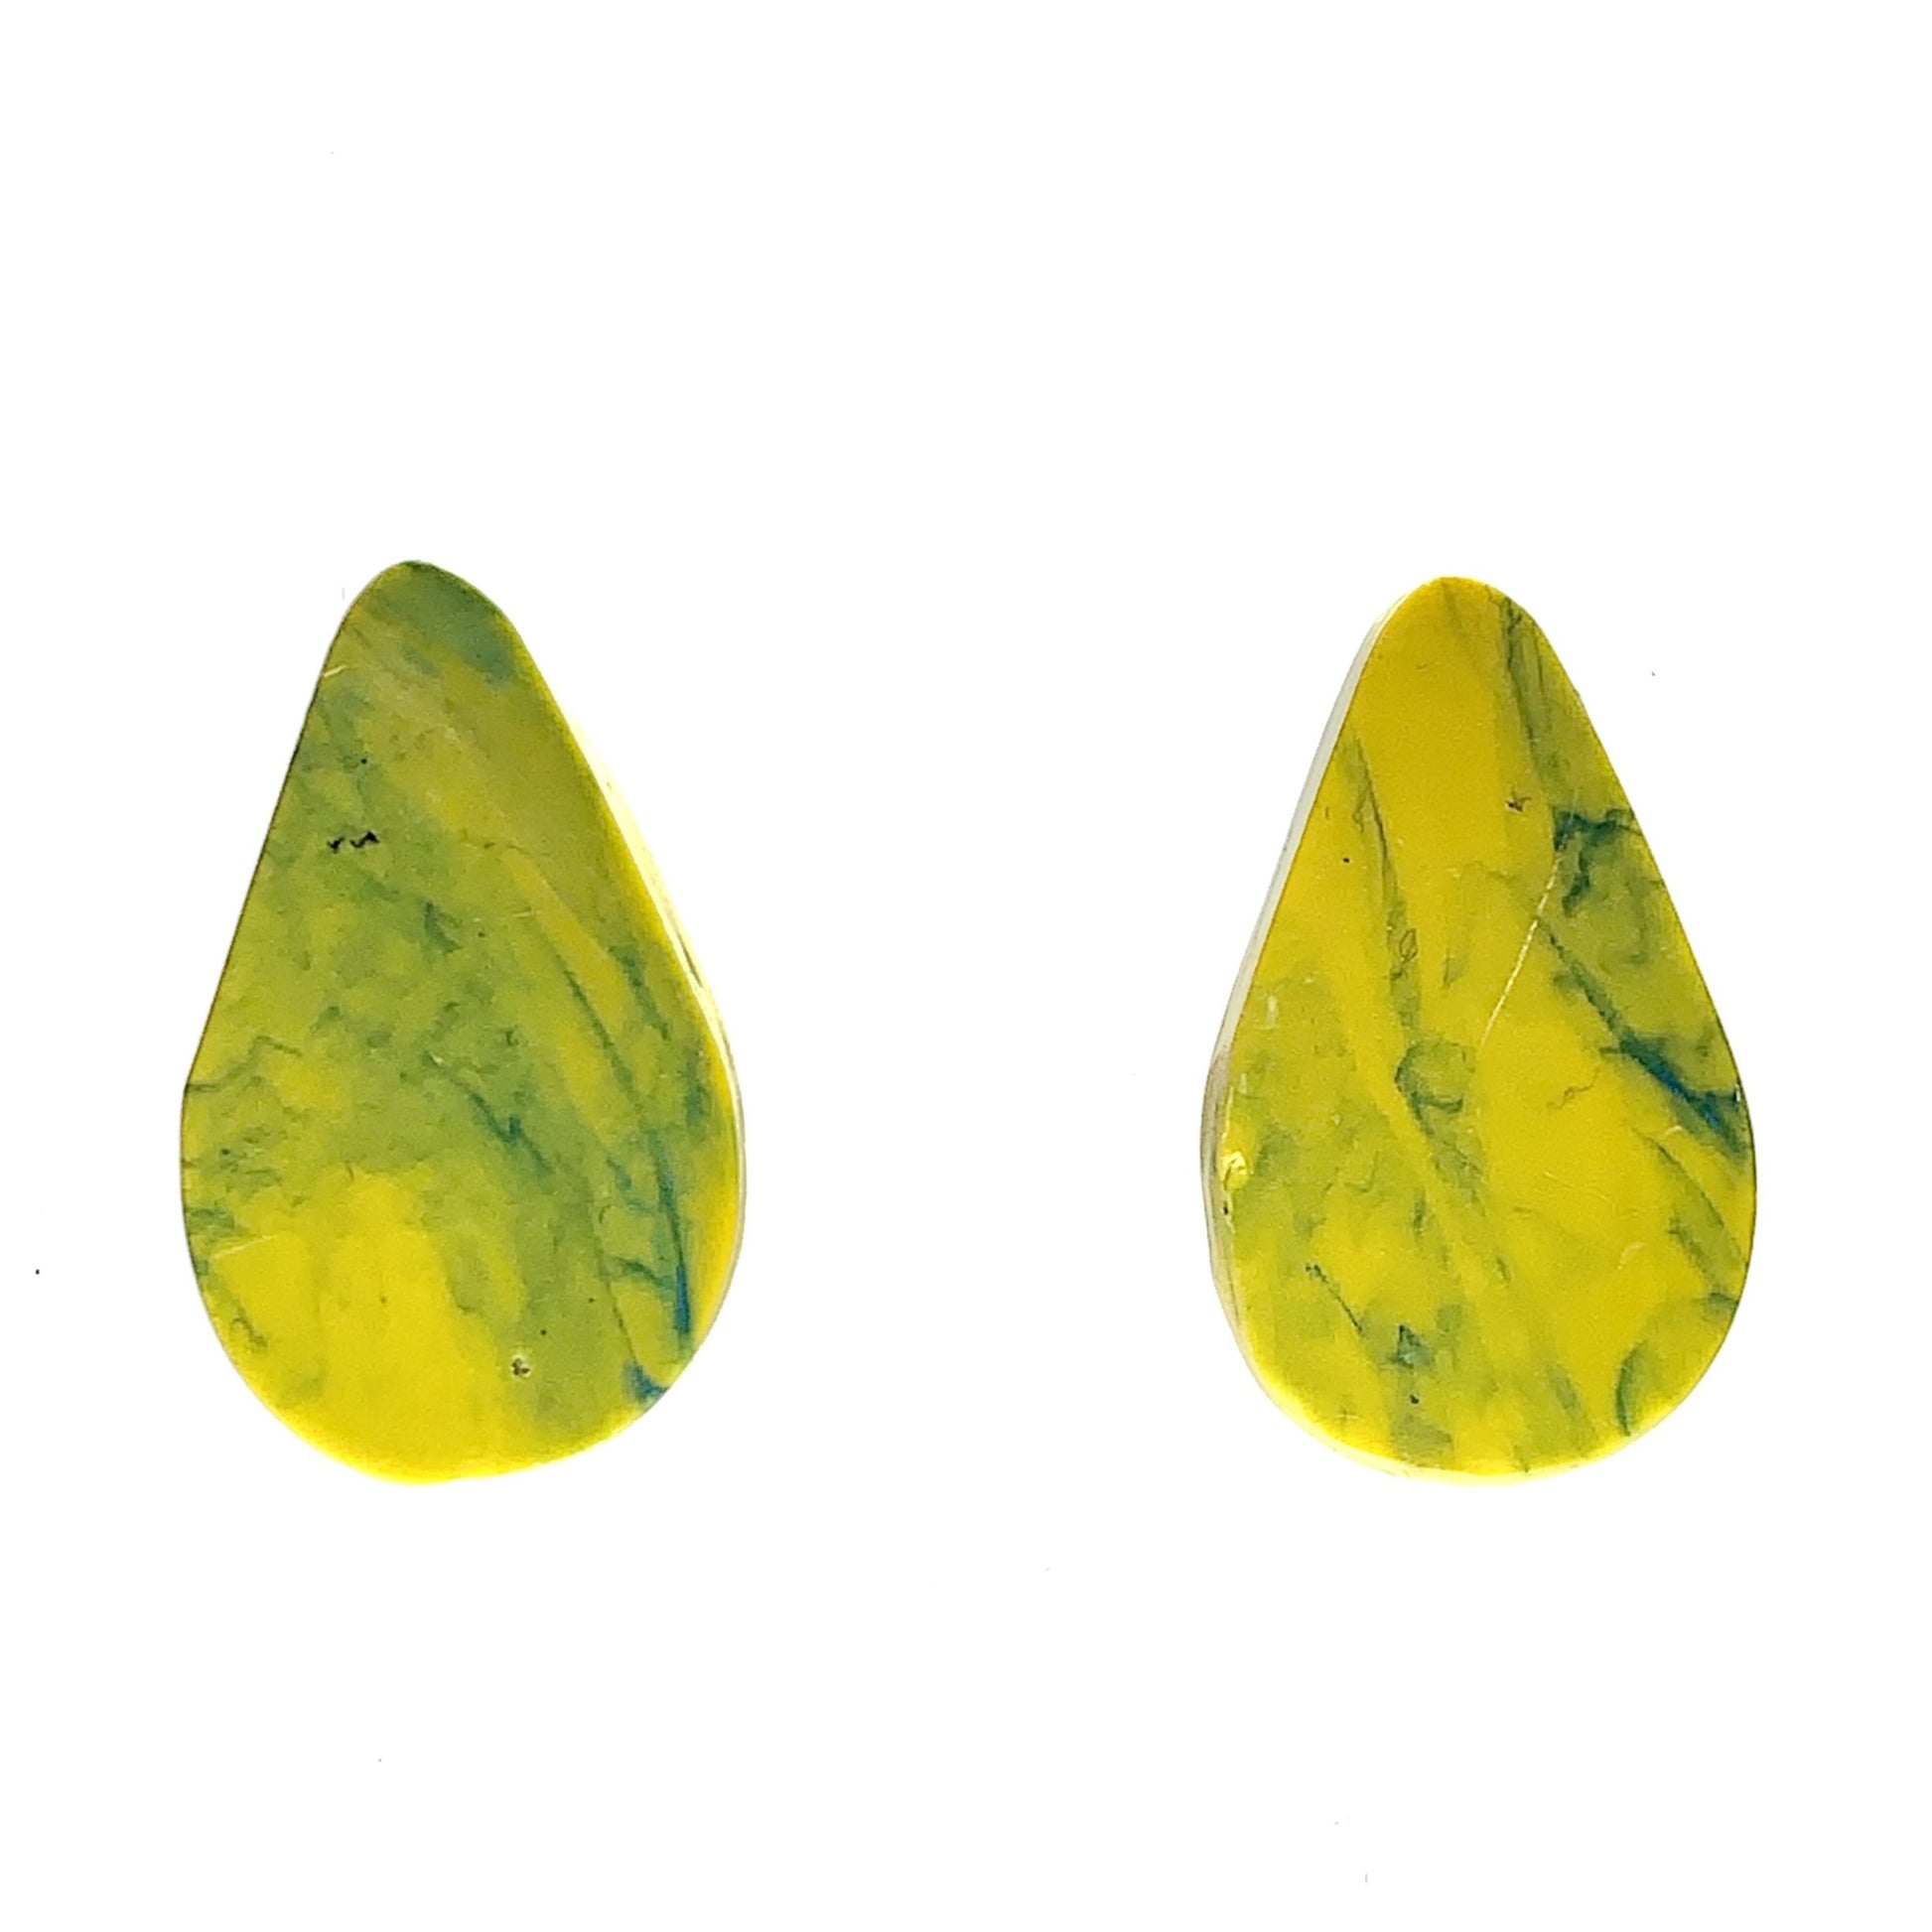 Yellow handmade studs from recycled plastic teardrop